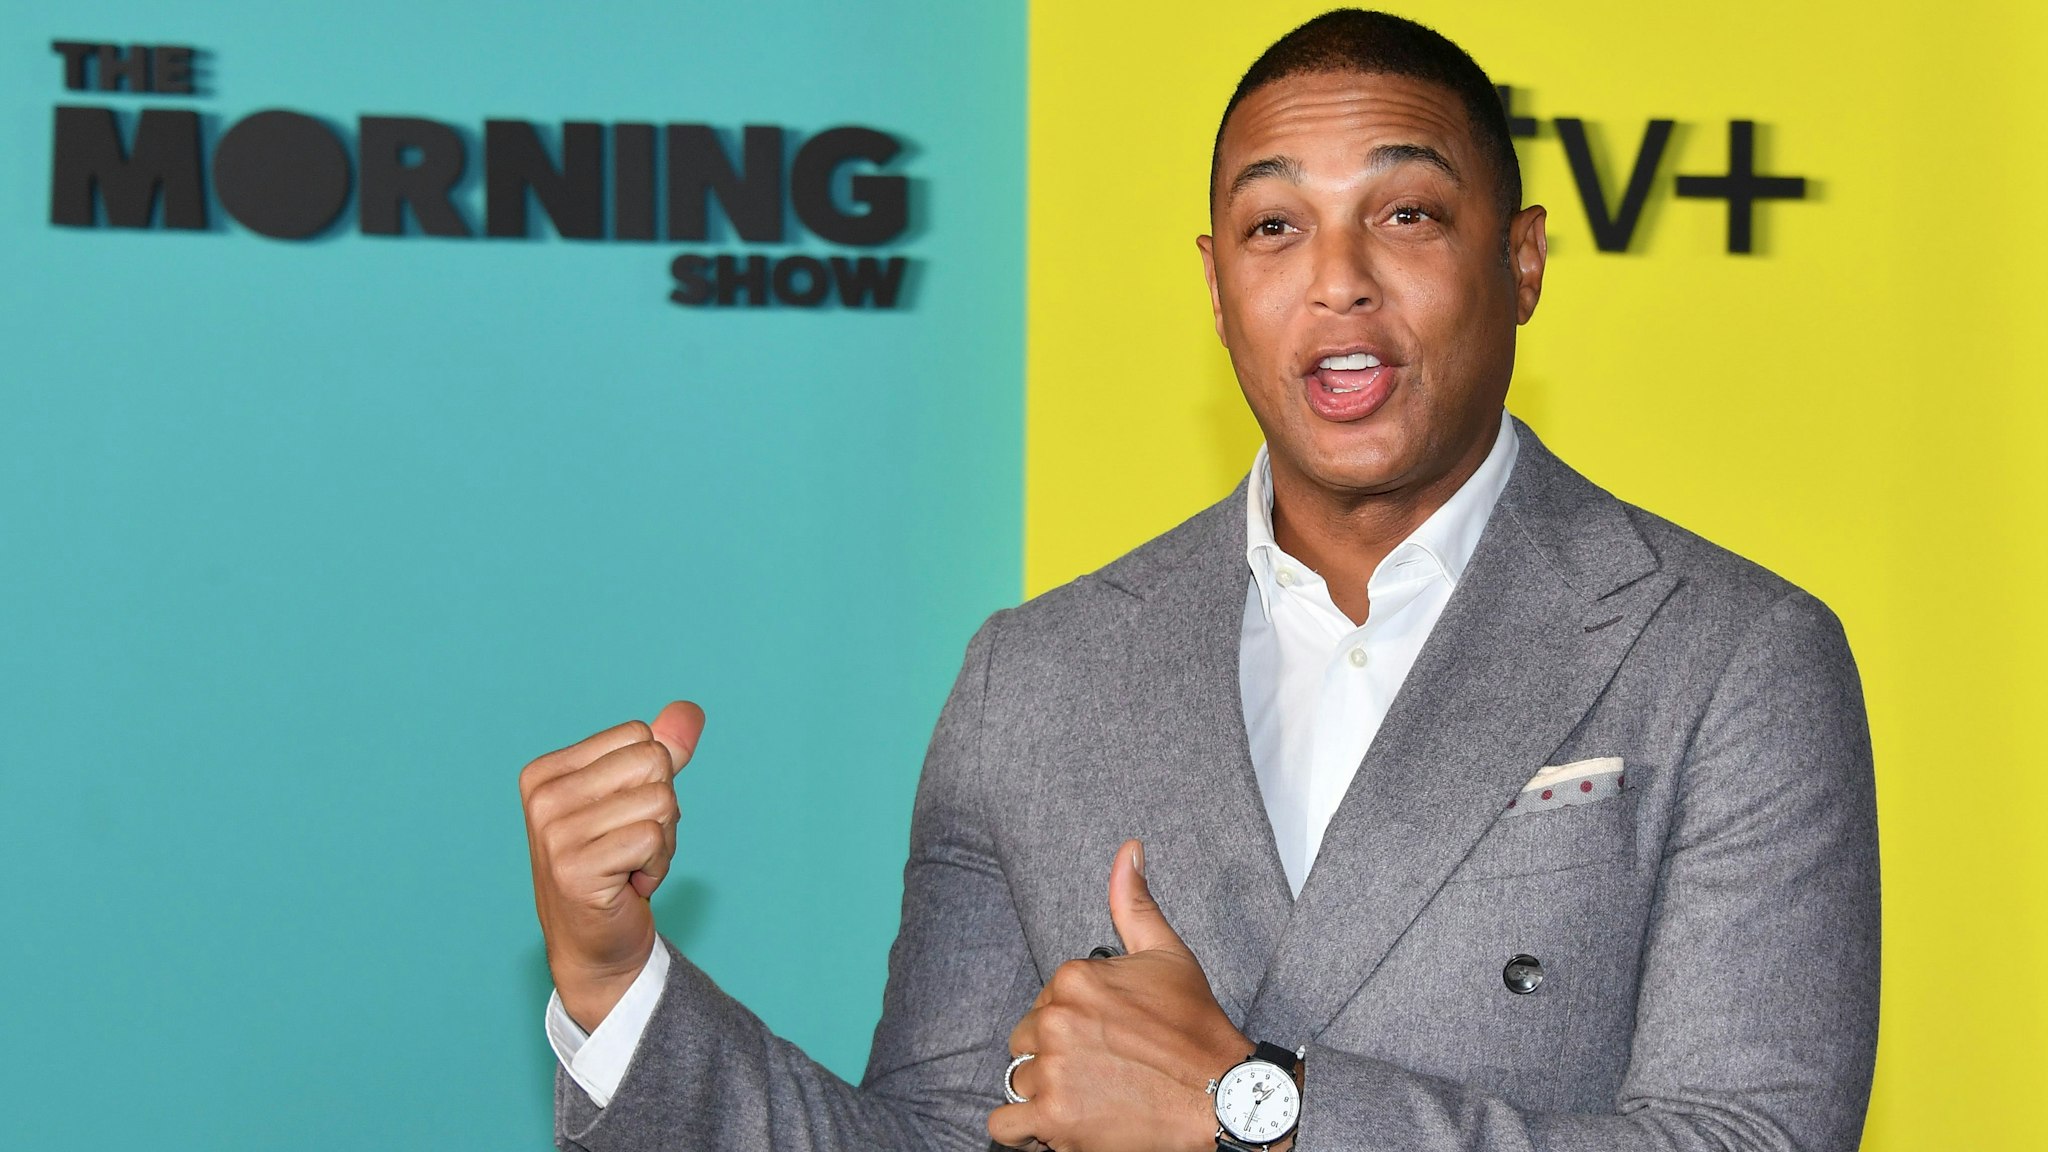 Don Lemon arrives for Apples The Morning Show global premiere at Lincoln Center- David Geffen Hall on October 28, 2019 in New York.